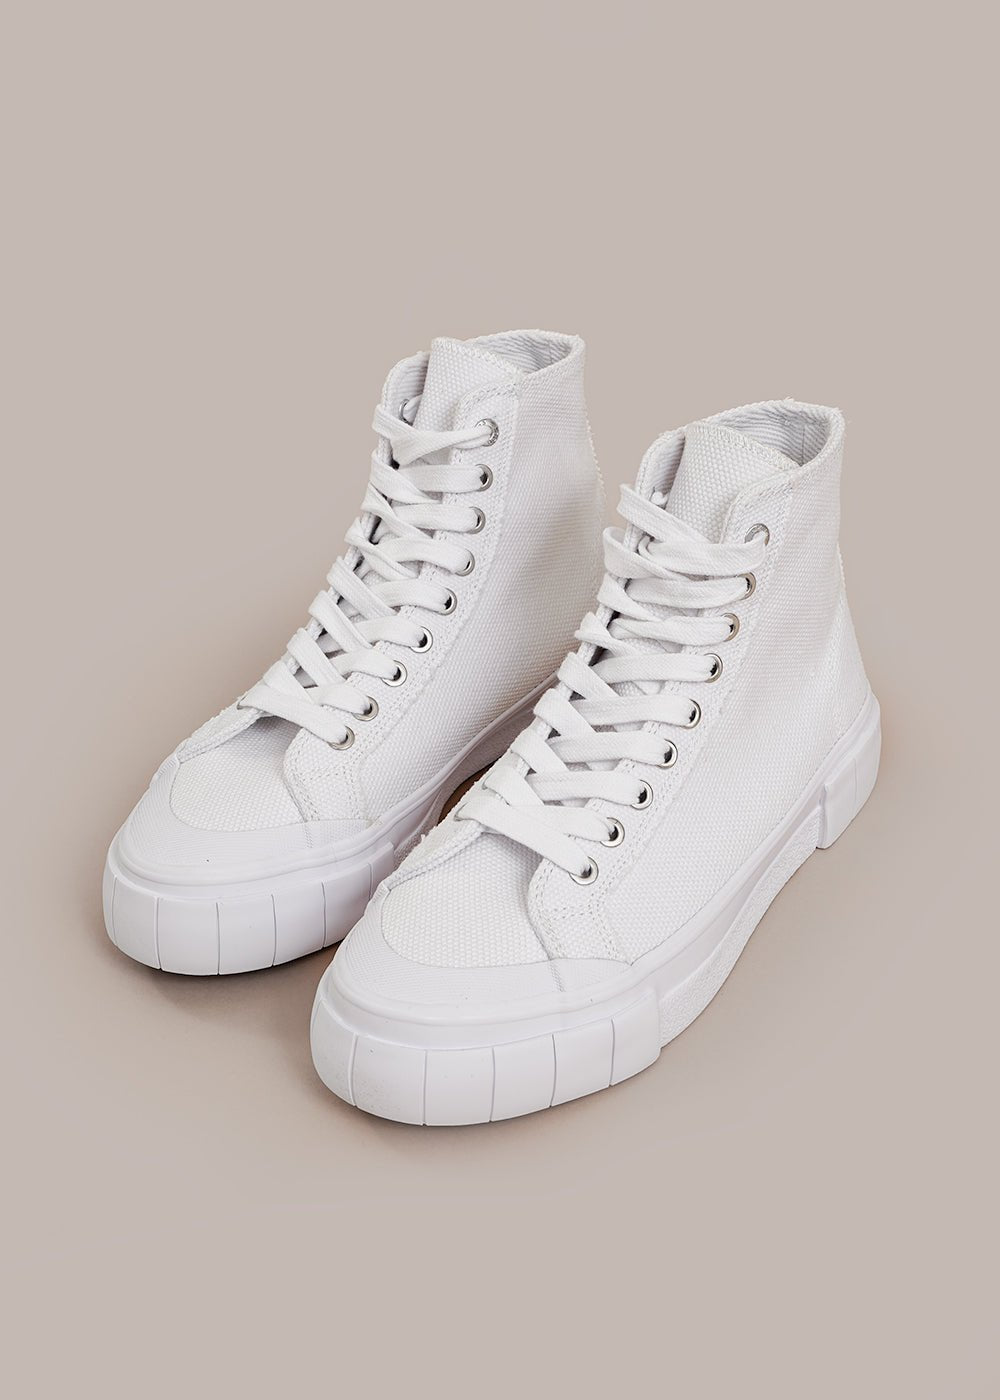 GOOD NEWS White Palm Core Sneakers - New Classics Studios Sustainable Ethical Fashion Canada